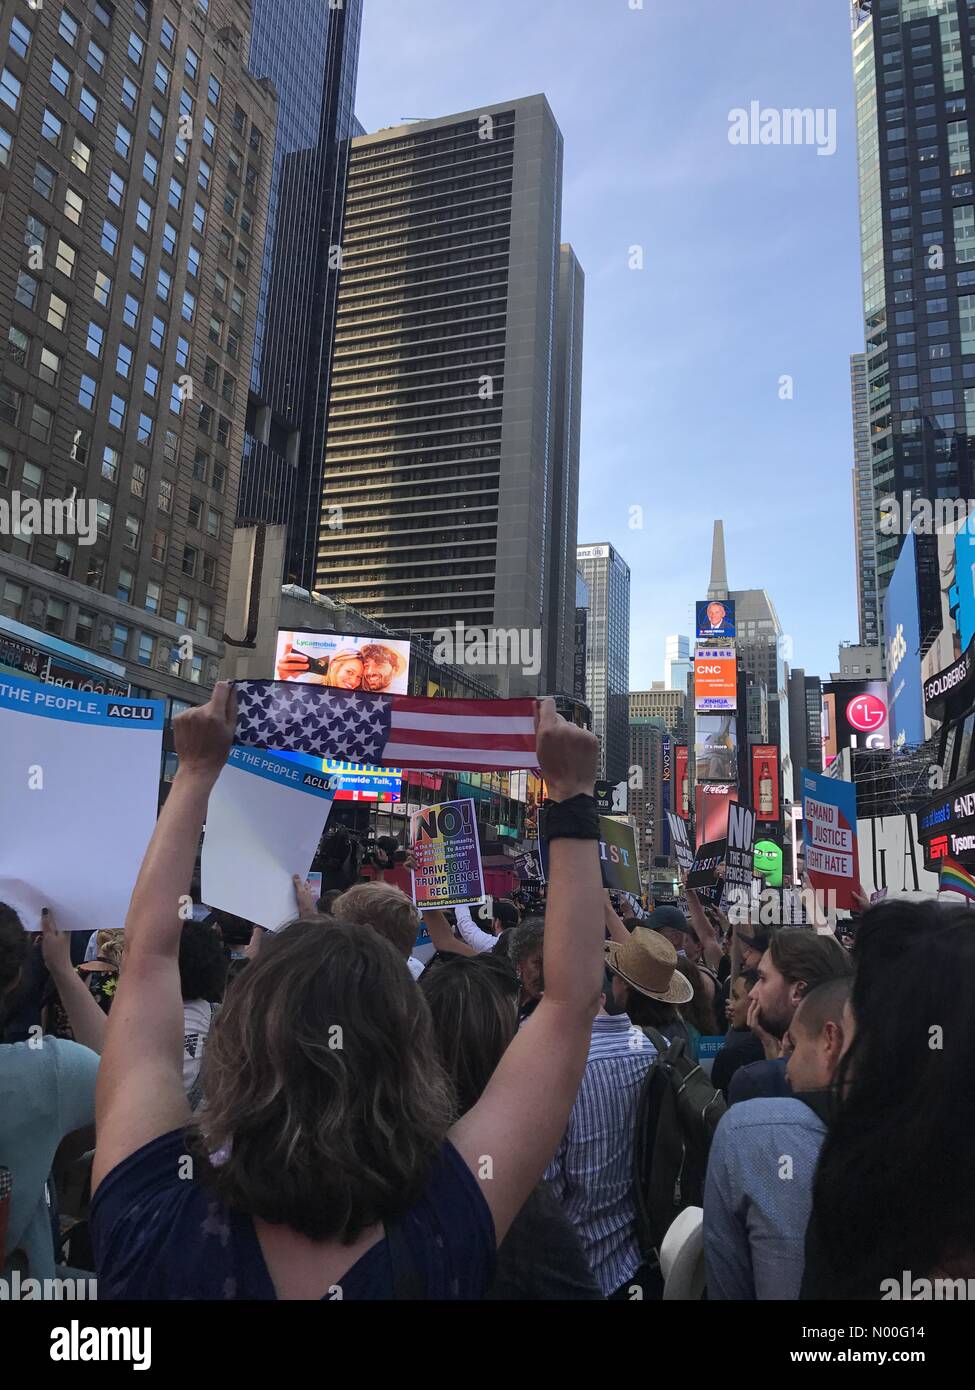 W 43rd St, New York, New York, USA. 26th July, 2017. Today 07/26/12017, Protesters in Times Square denounce Trump’s transgender military ban Credit: Ryan Rahman/StockimoNews/Alamy Live News Stock Photo